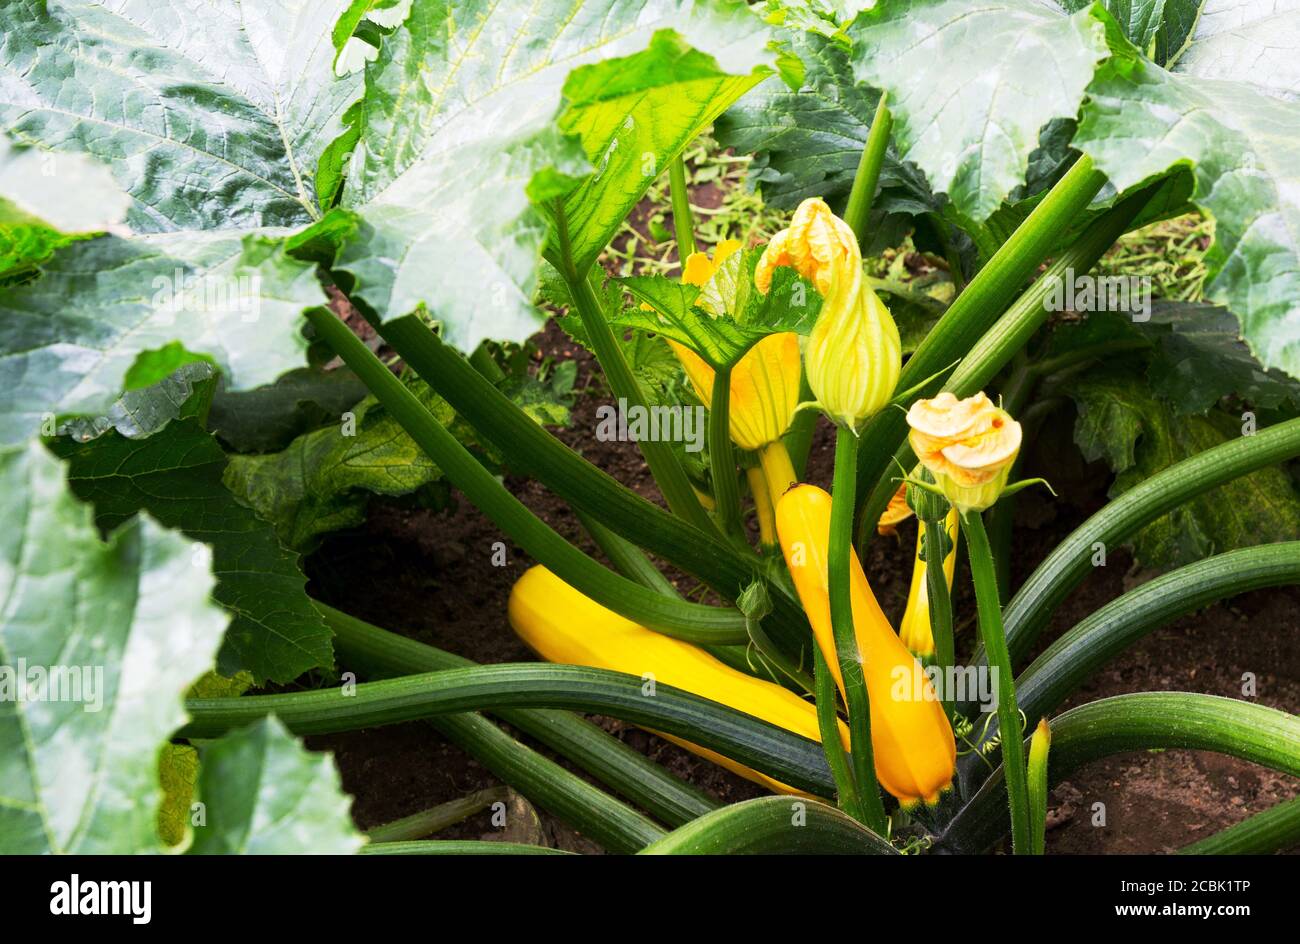 Zucchini plant.  Zucchini with flower and fruit in field. Green vegetable marrow growing on bush. Courgettes blossoms. Stock Photo